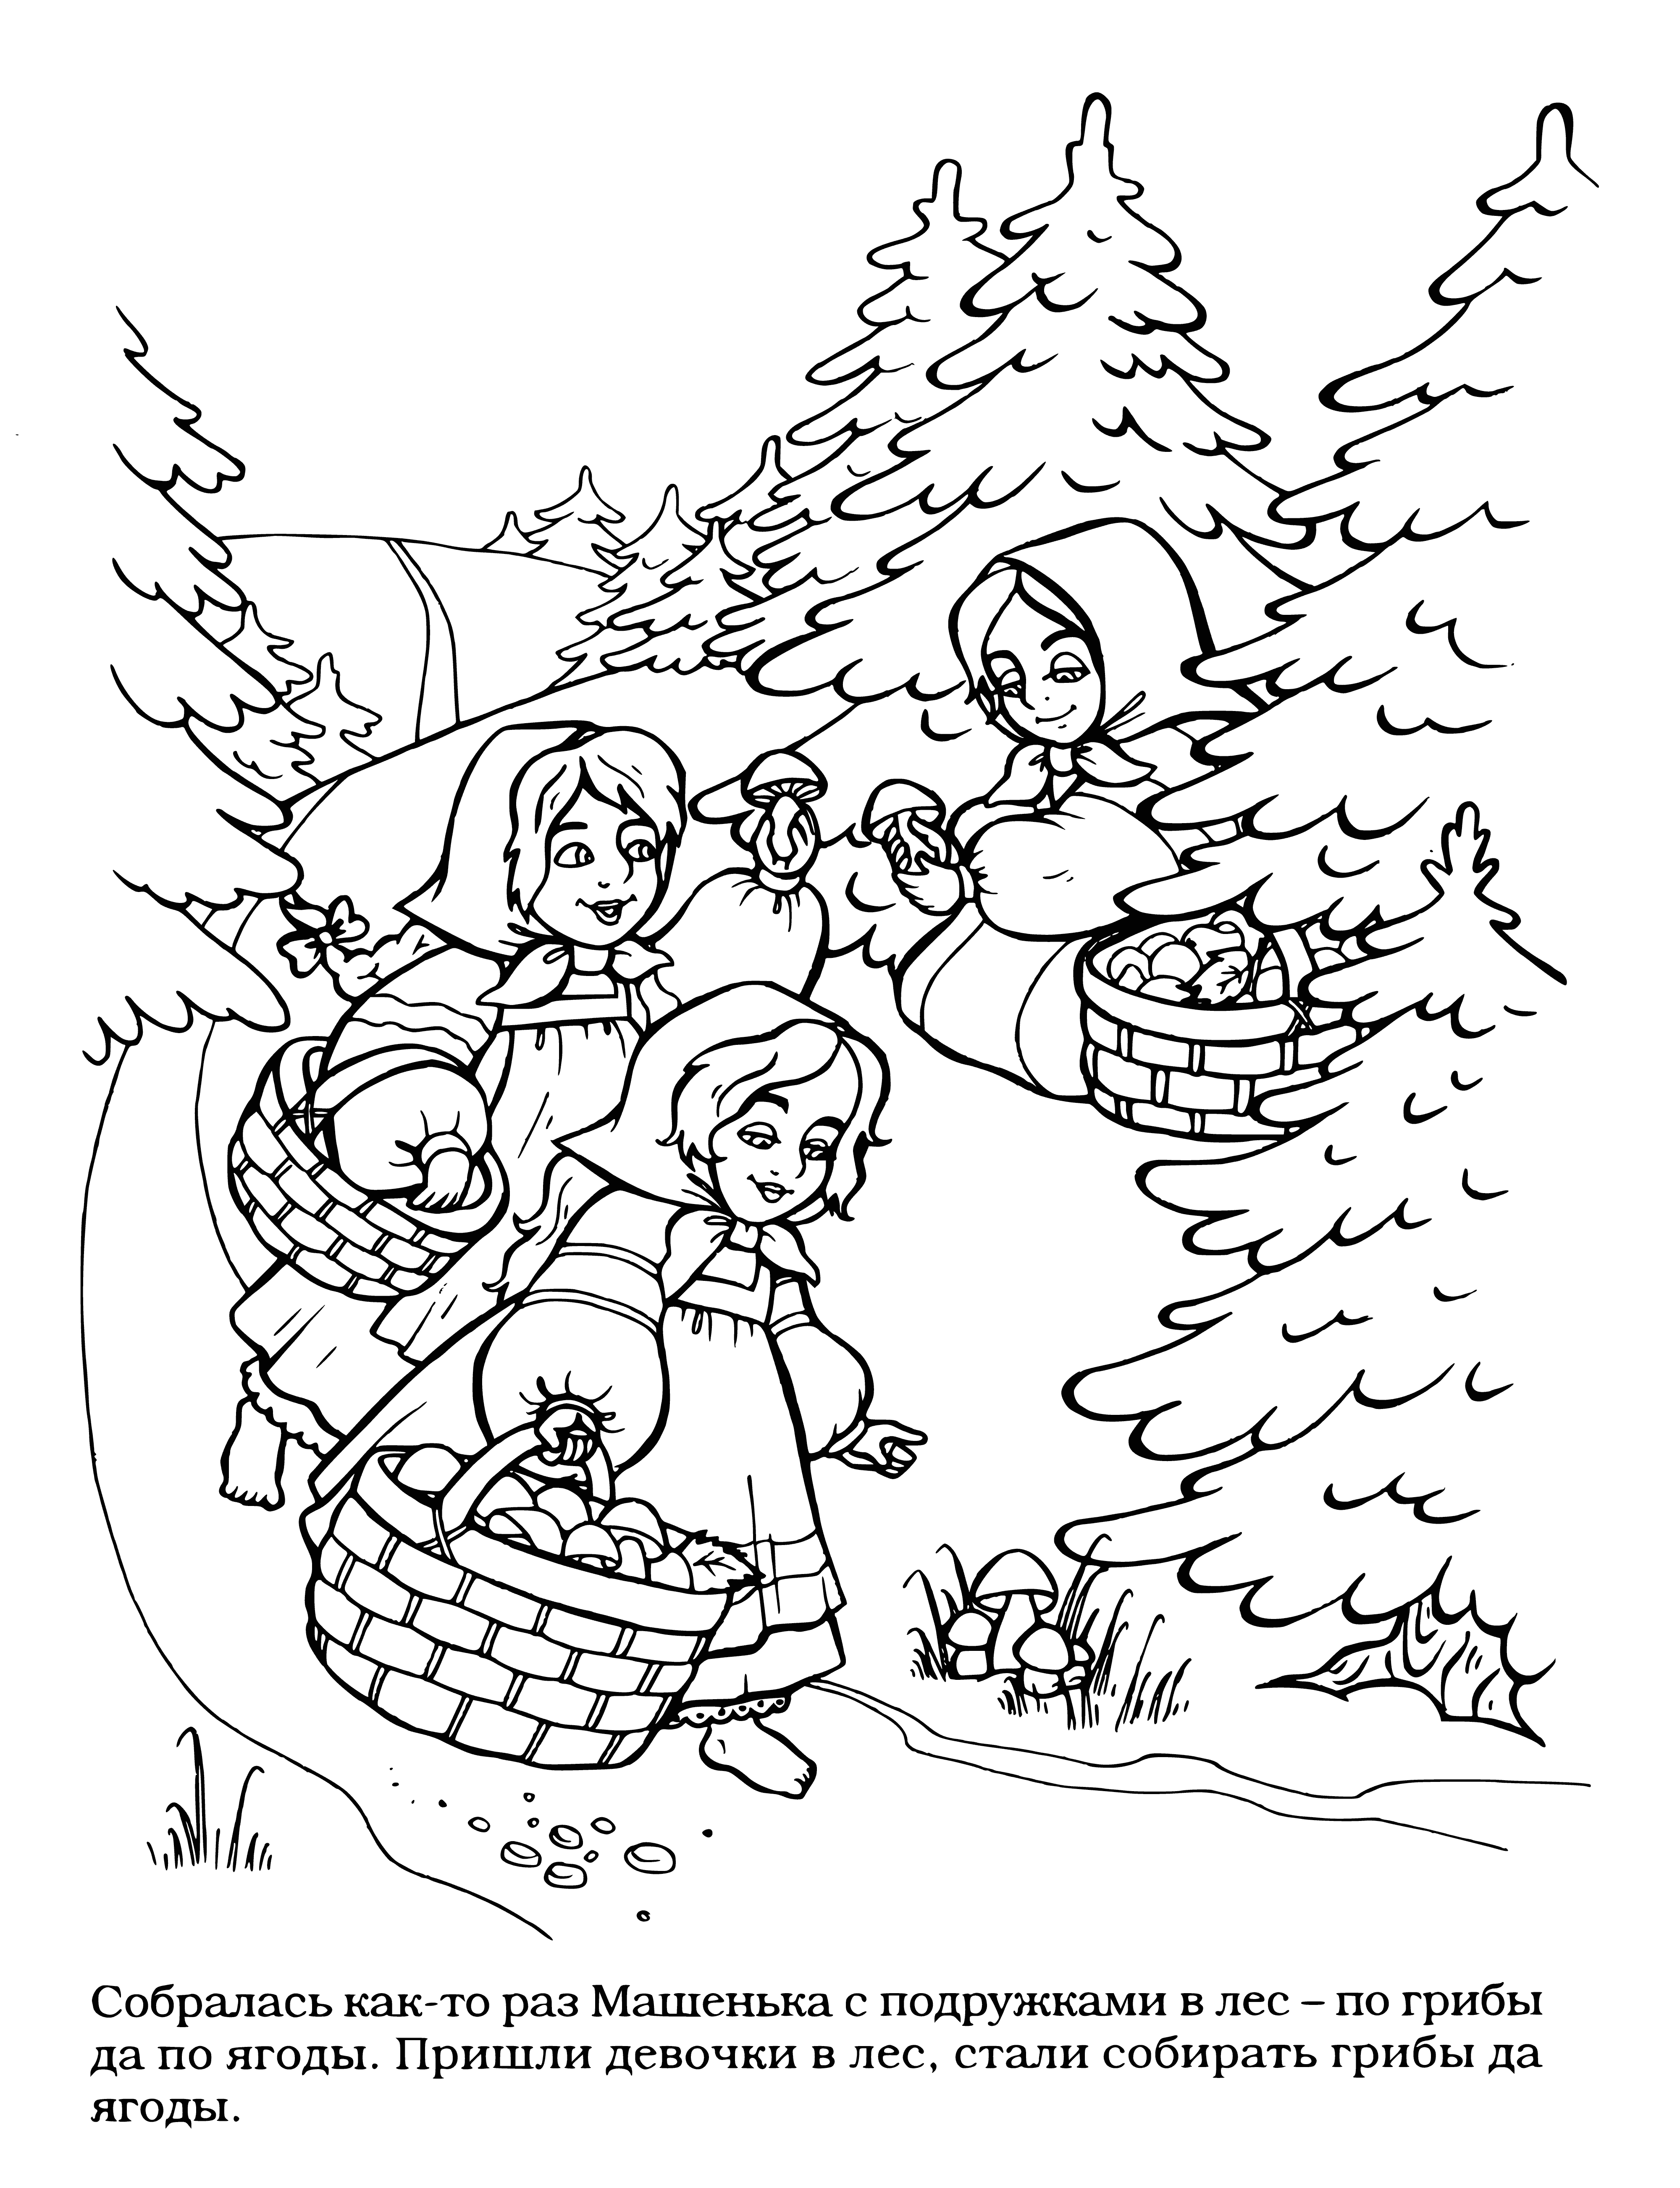 Masha went to the forest to pick mushrooms coloring page